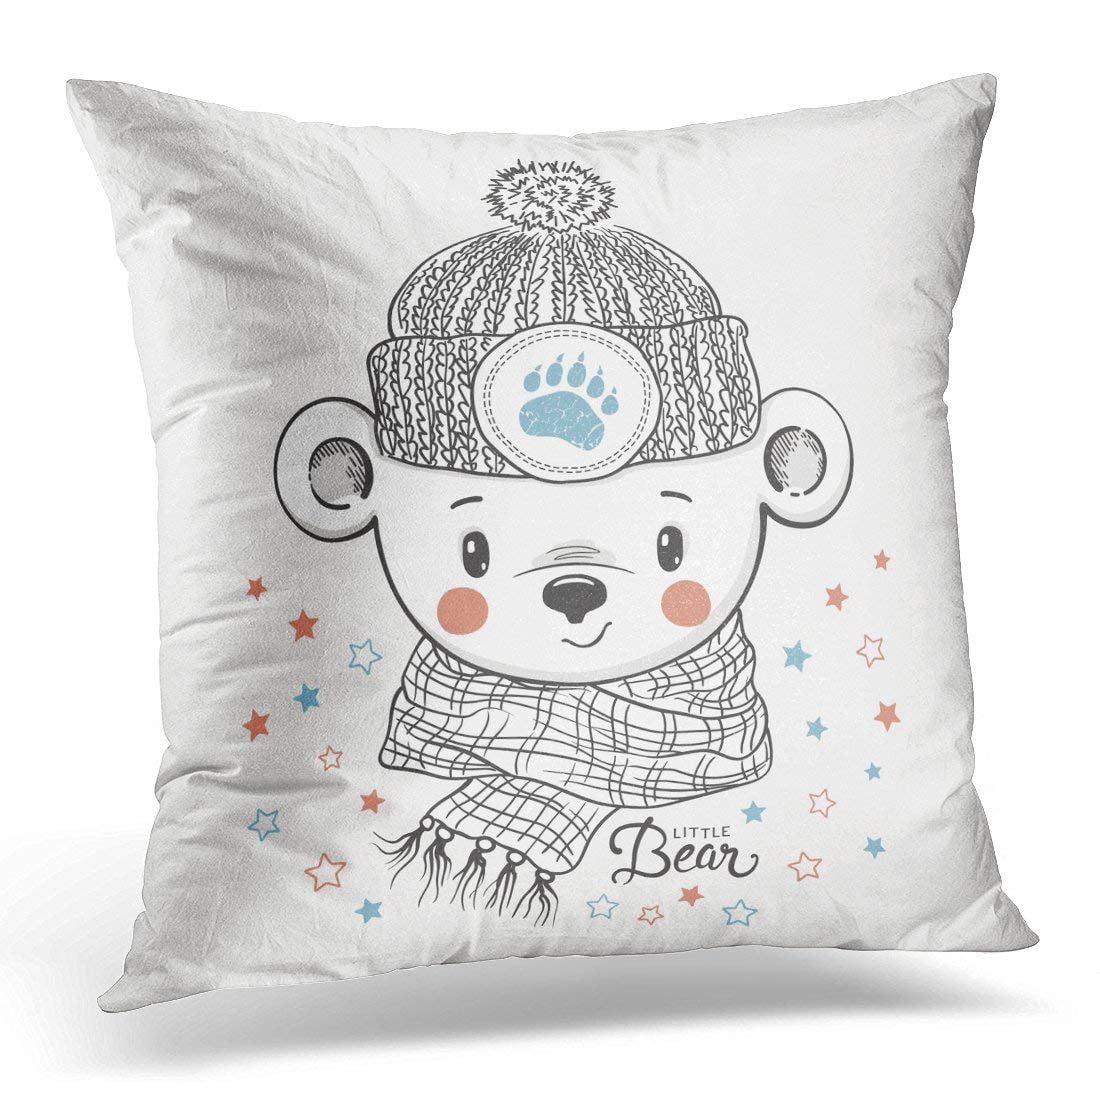 A Off White with Gray Bear Cushion 